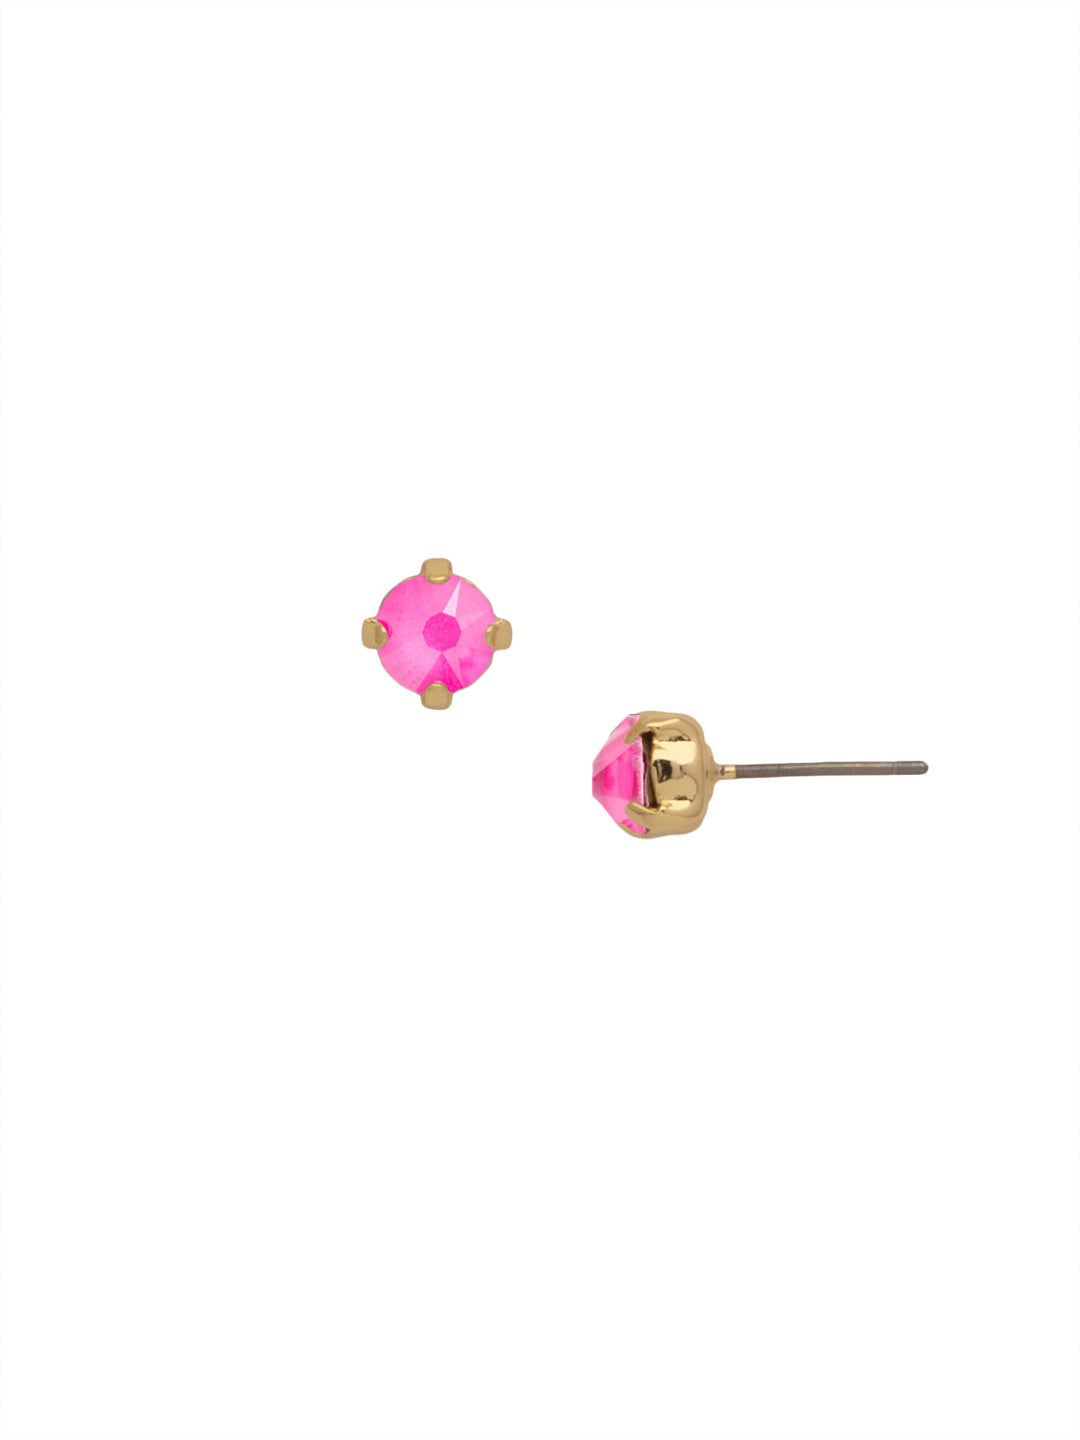 Jayda Stud Earrings - EDN32BGWDW - <p>The Jayda Stud Earrings are the perfect every day wardrobe staple. A round crystal nestles perfectly in a metal plated post with four prongs. </p><p>Need help picking a stud? <a href="https://www.sorrelli.com/blogs/sisterhood/round-stud-earrings-101-a-rundown-of-sizes-styles-and-sparkle">Check out our size guide!</a> From Sorrelli's Wild Watermelon collection in our Bright Gold-tone finish.</p>